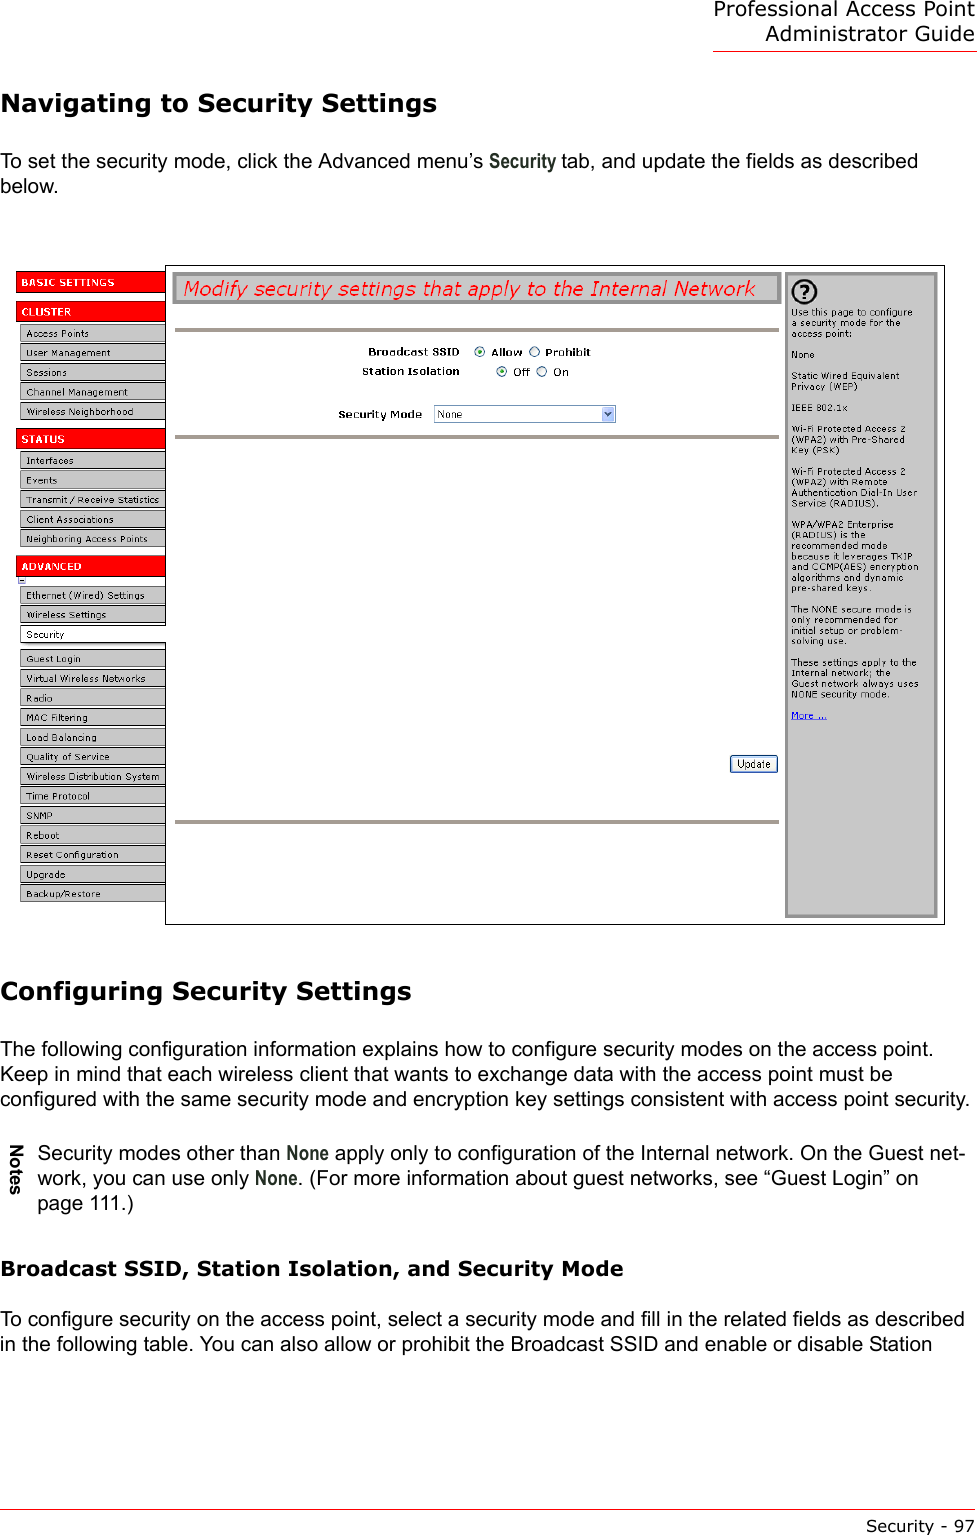 Professional Access Point Administrator GuideSecurity - 97Navigating to Security SettingsTo set the security mode, click the Advanced menu’s Security tab, and update the fields as described below.Configuring Security SettingsThe following configuration information explains how to configure security modes on the access point. Keep in mind that each wireless client that wants to exchange data with the access point must be configured with the same security mode and encryption key settings consistent with access point security.Broadcast SSID, Station Isolation, and Security ModeTo configure security on the access point, select a security mode and fill in the related fields as described in the following table. You can also allow or prohibit the Broadcast SSID and enable or disable Station NotesSecurity modes other than None apply only to configuration of the Internal network. On the Guest net-work, you can use only None. (For more information about guest networks, see “Guest Login” on page 111.)